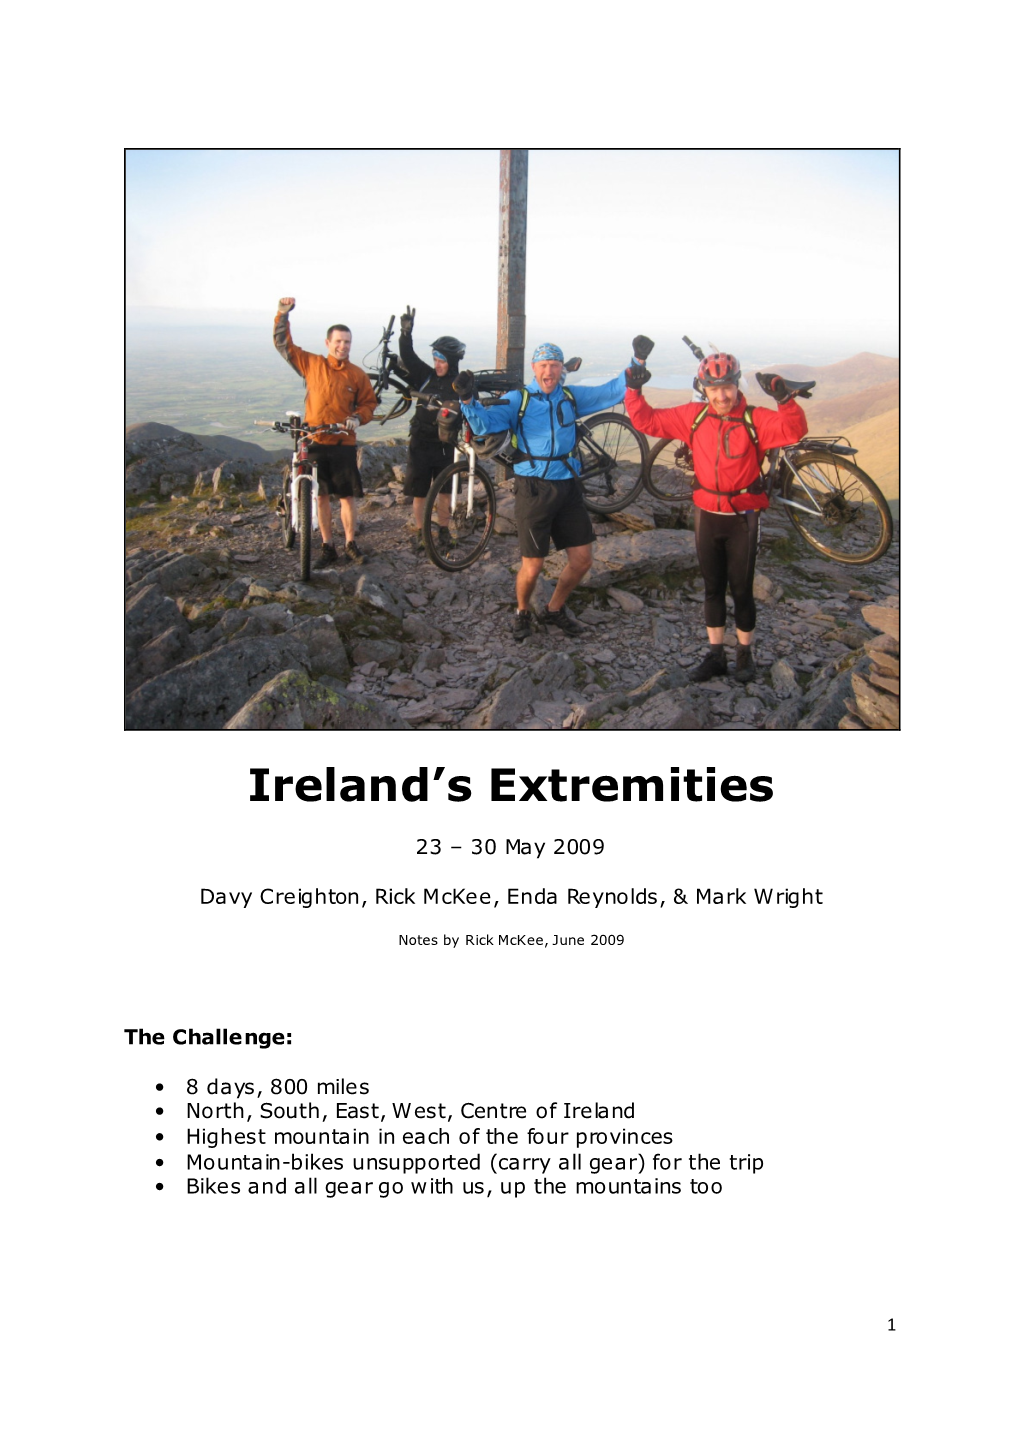 Ireland's Extremities Trip Was Simple Enough in Concept